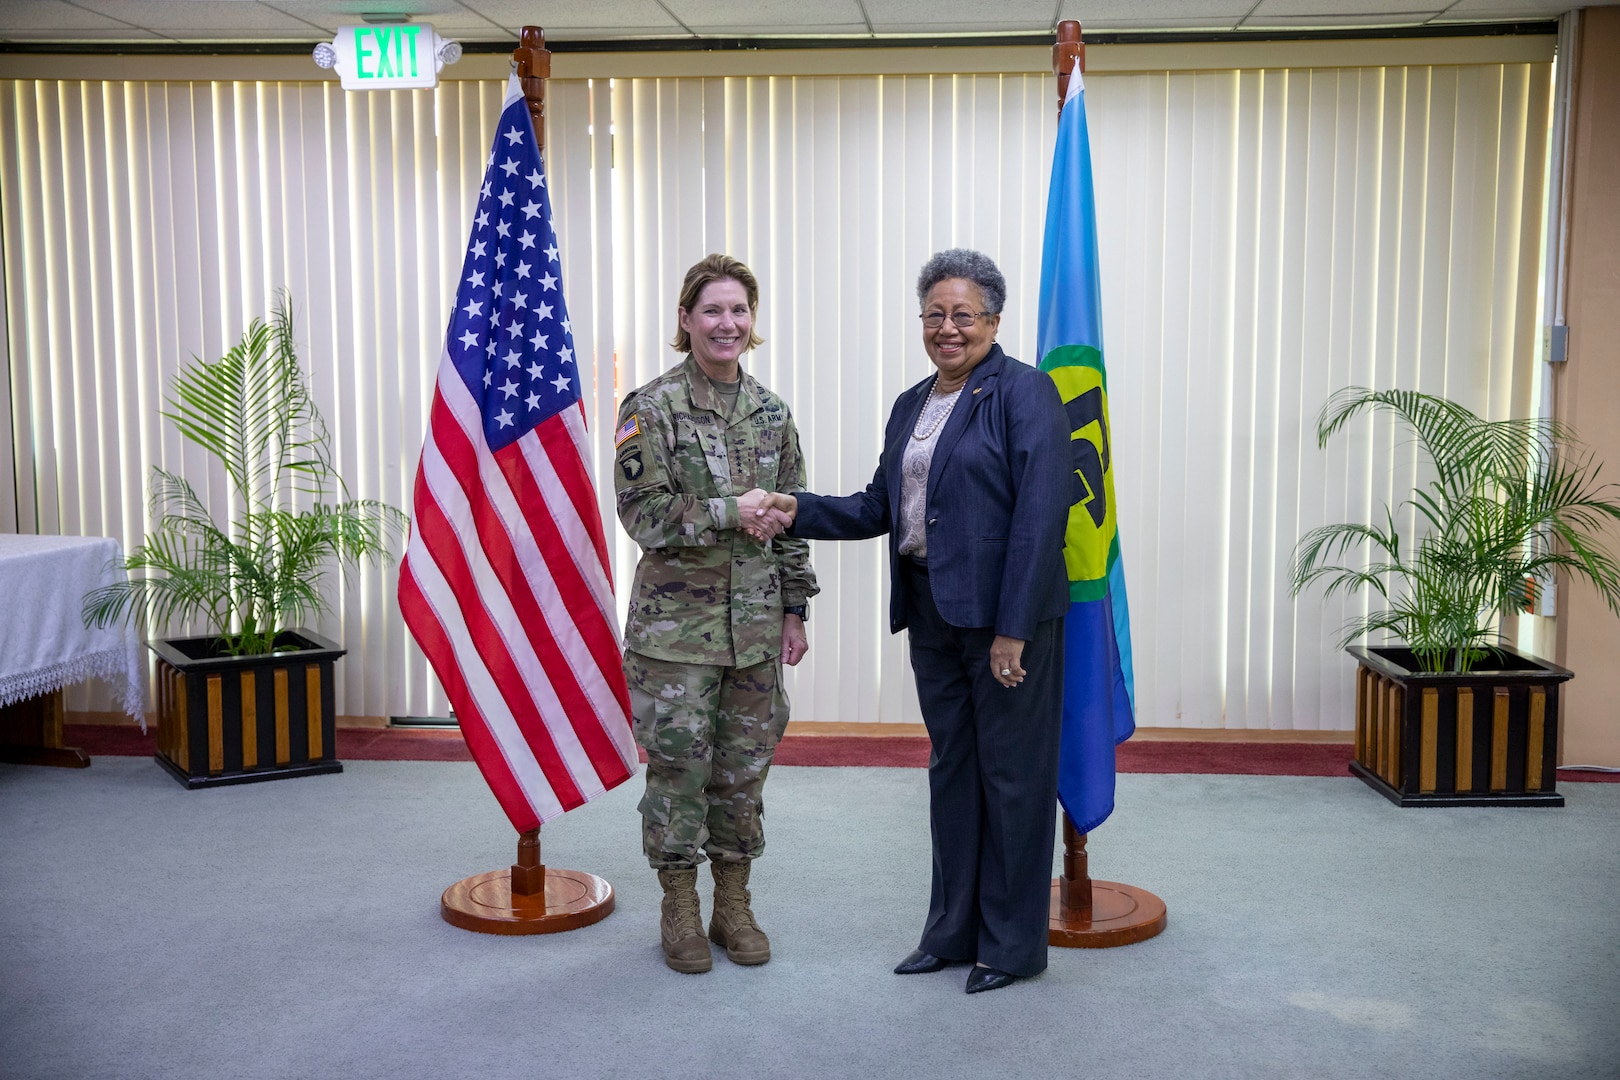 The commander of U.S. Southern Command, U.S Army Gen. Laura Richardson, meets with CARICOM Secretary General Dr. Carla Natalie Barnett to discuss regional security, including cyber security and climate change.